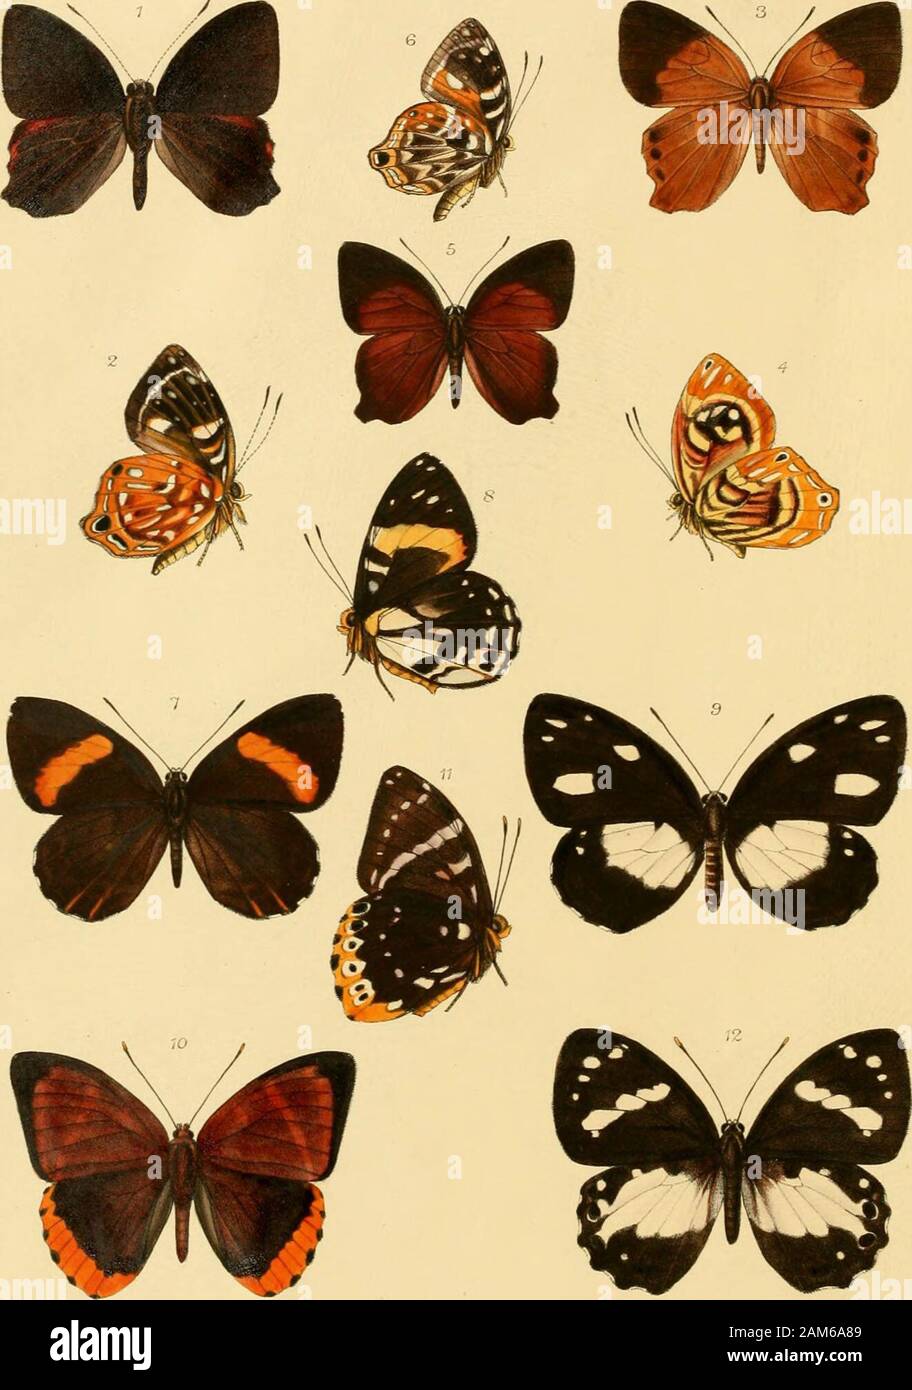 Rhopalocera exotica ; being illustraions of new, rare, and unfigured species of butterflies . t ofwhich are minute; the orange-rufous bar on the inner margin is wider andmore elongate. The posterior wings are orange-rufous, bordered all roundrather narrowly by black. Underside. Anterior wings as on the upperside, except that the innermarginal rufous band is represented by a pale buff streak. Posterior wingsblack, with a triangular spot near the base of the cell; two subcostal spots onthe disc, another elongate spot at the end of the cell; a broad, more elongatestreak near the inner margin, rea Stock Photo